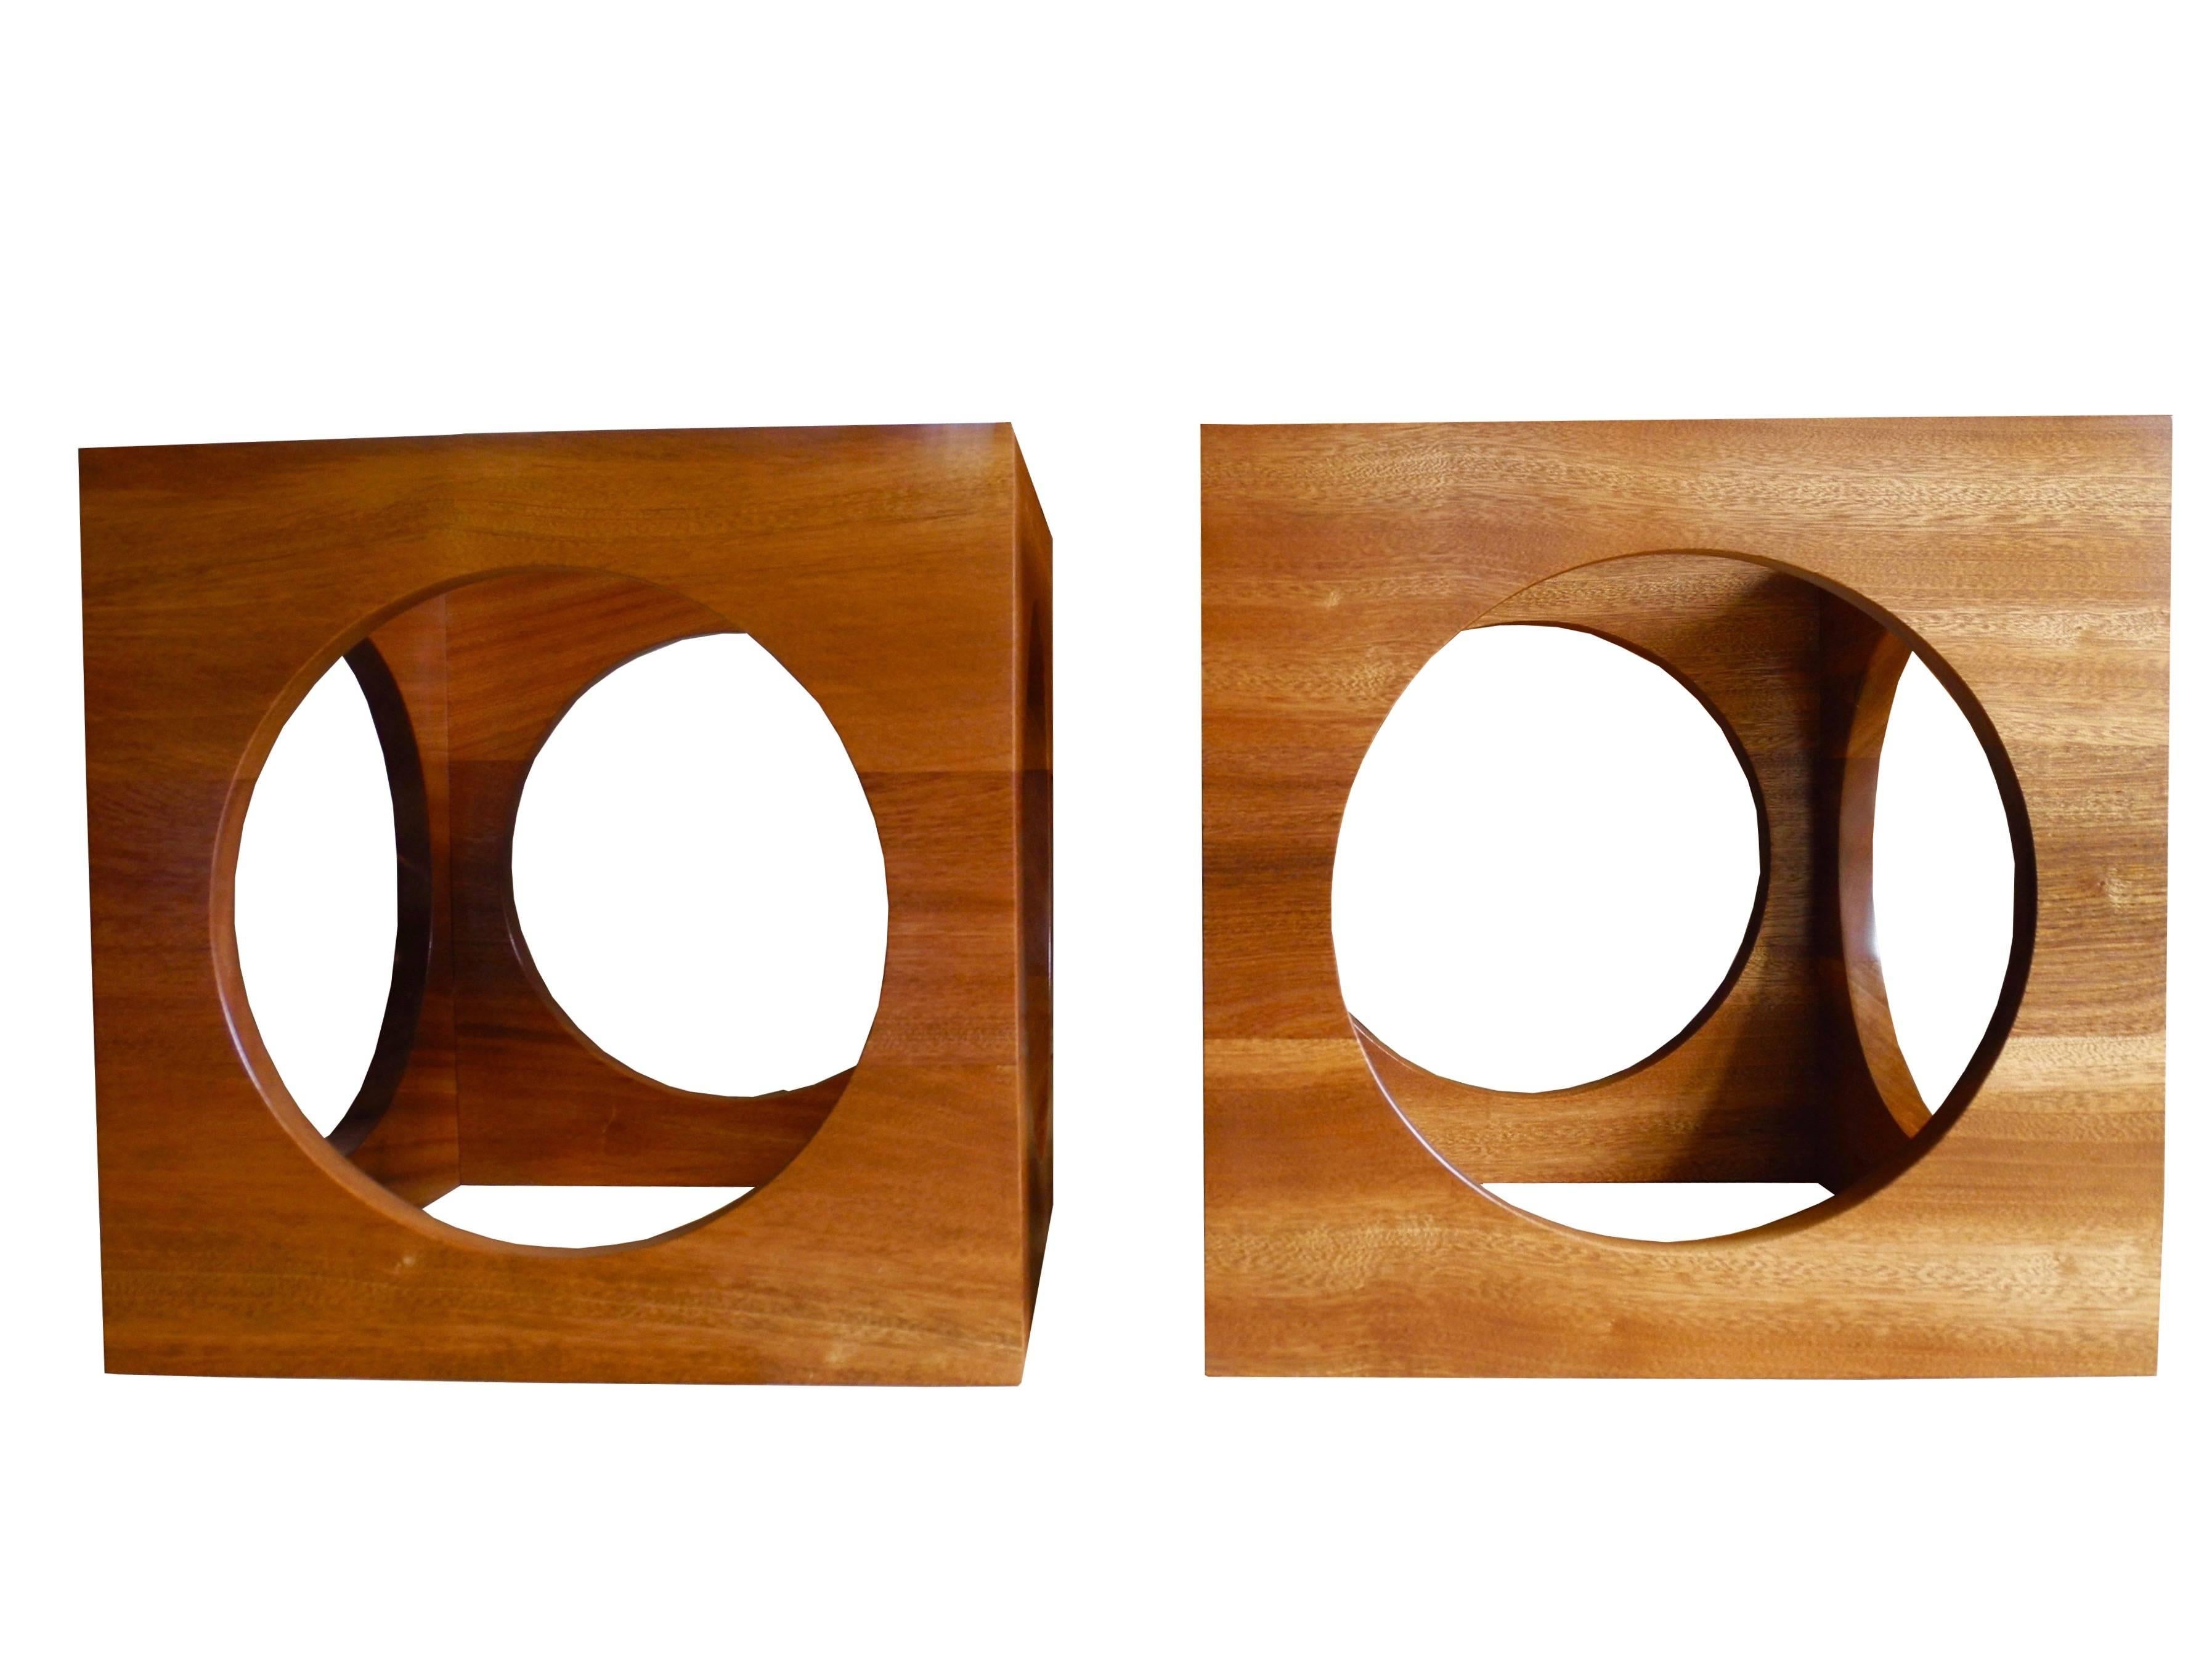 This pair of open cubed side tables or (put them together to make a coffee table) are made of African mahogany also known as Sapele wood. They make great nightstands too. These tables come with clear glass tops; designed by Corinne Robbins, 2017.